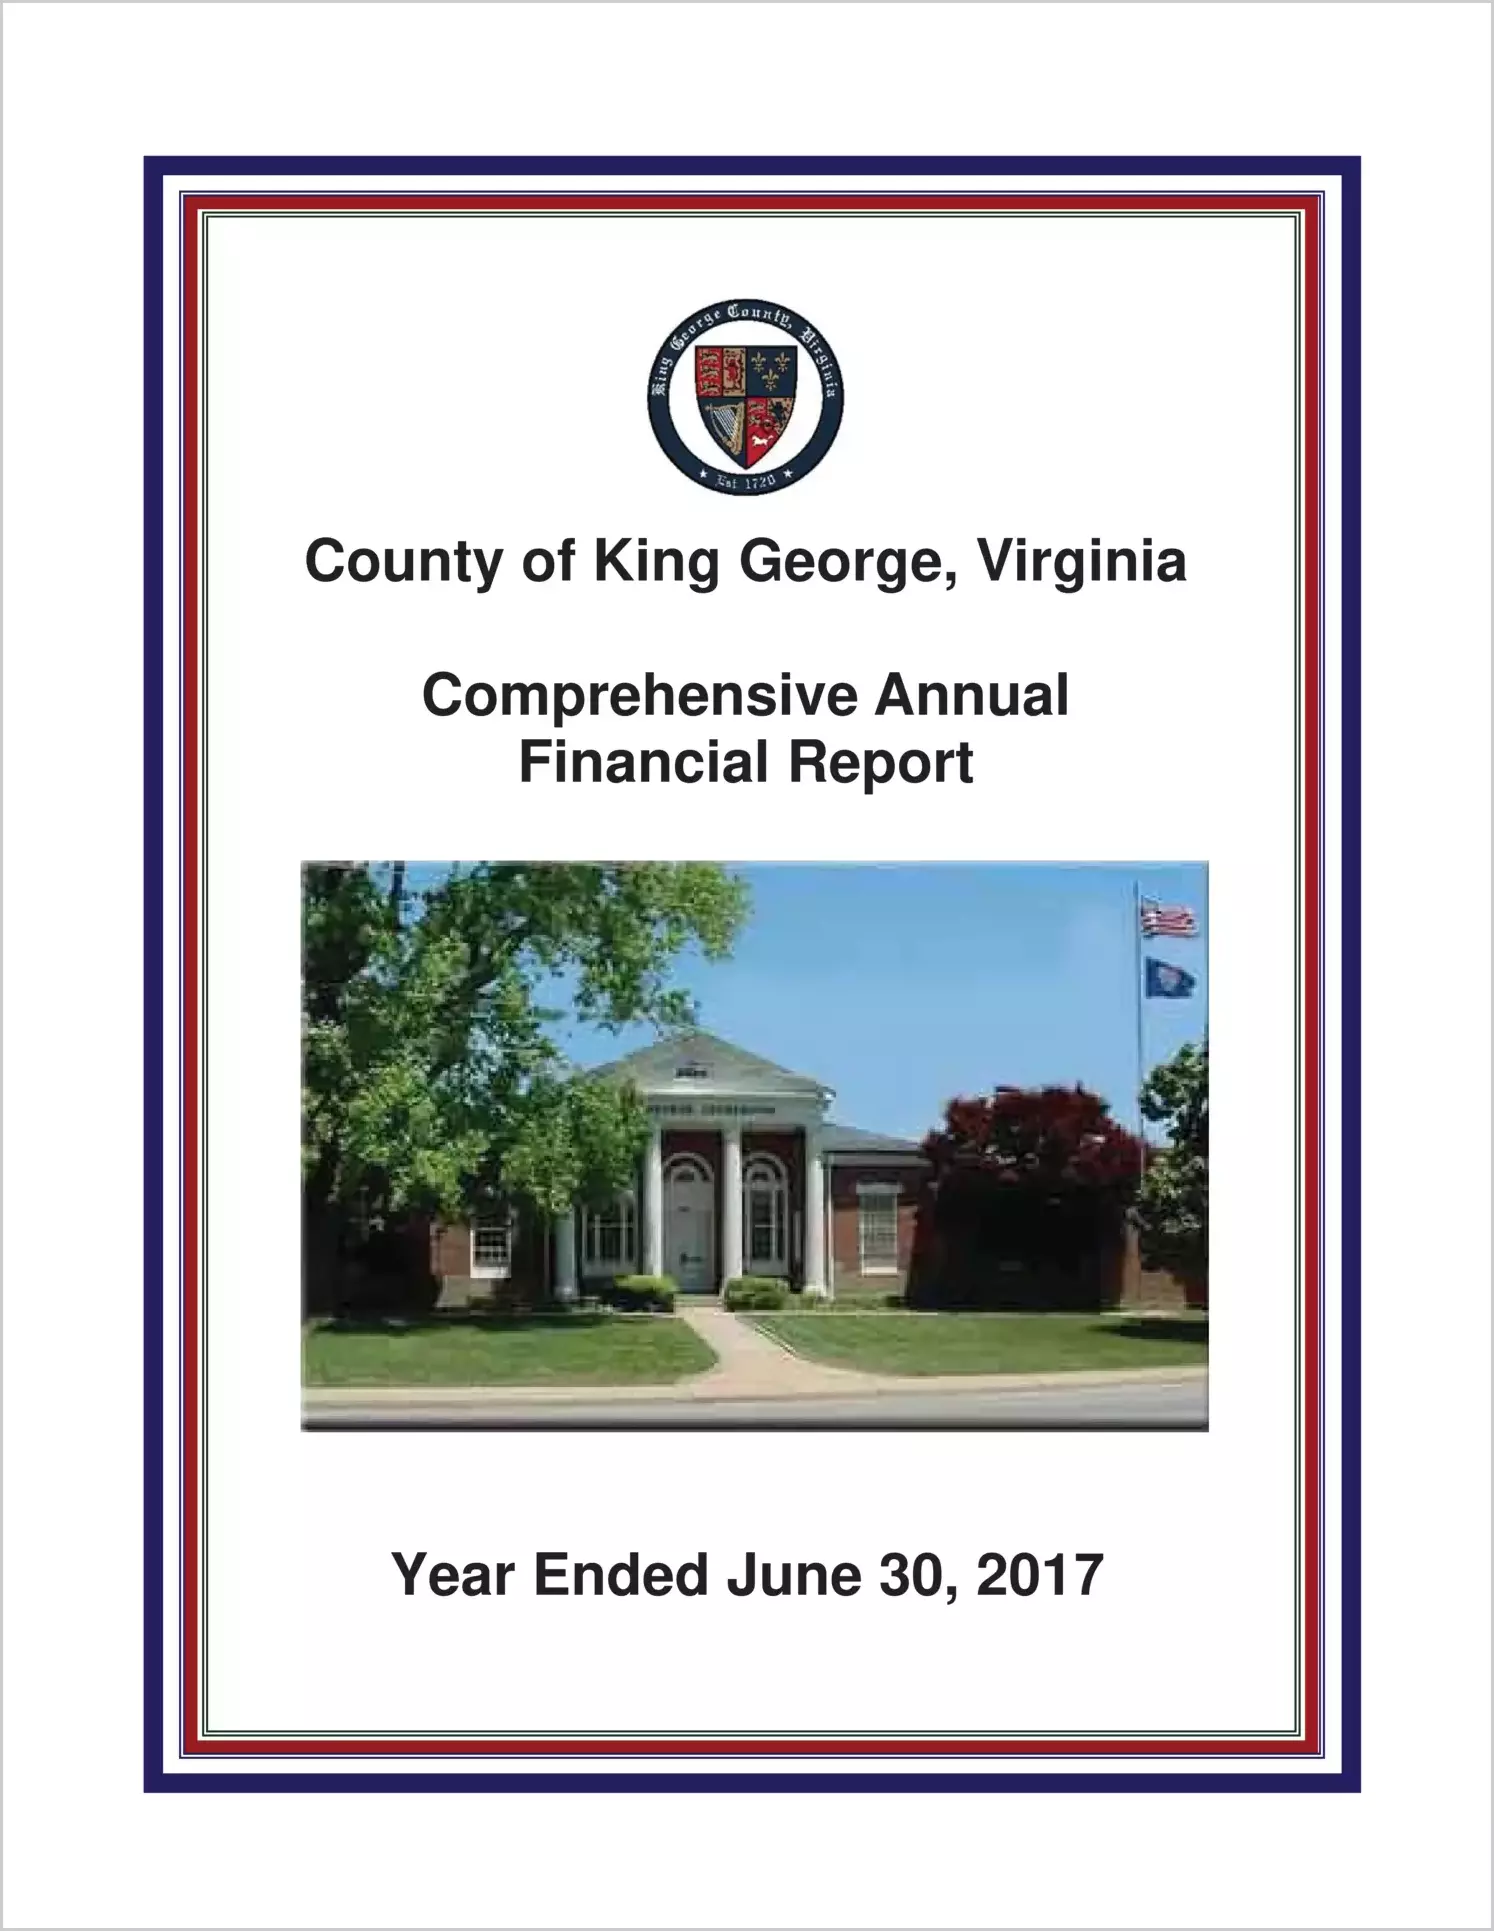 2017 Annual Financial Report for County of King George